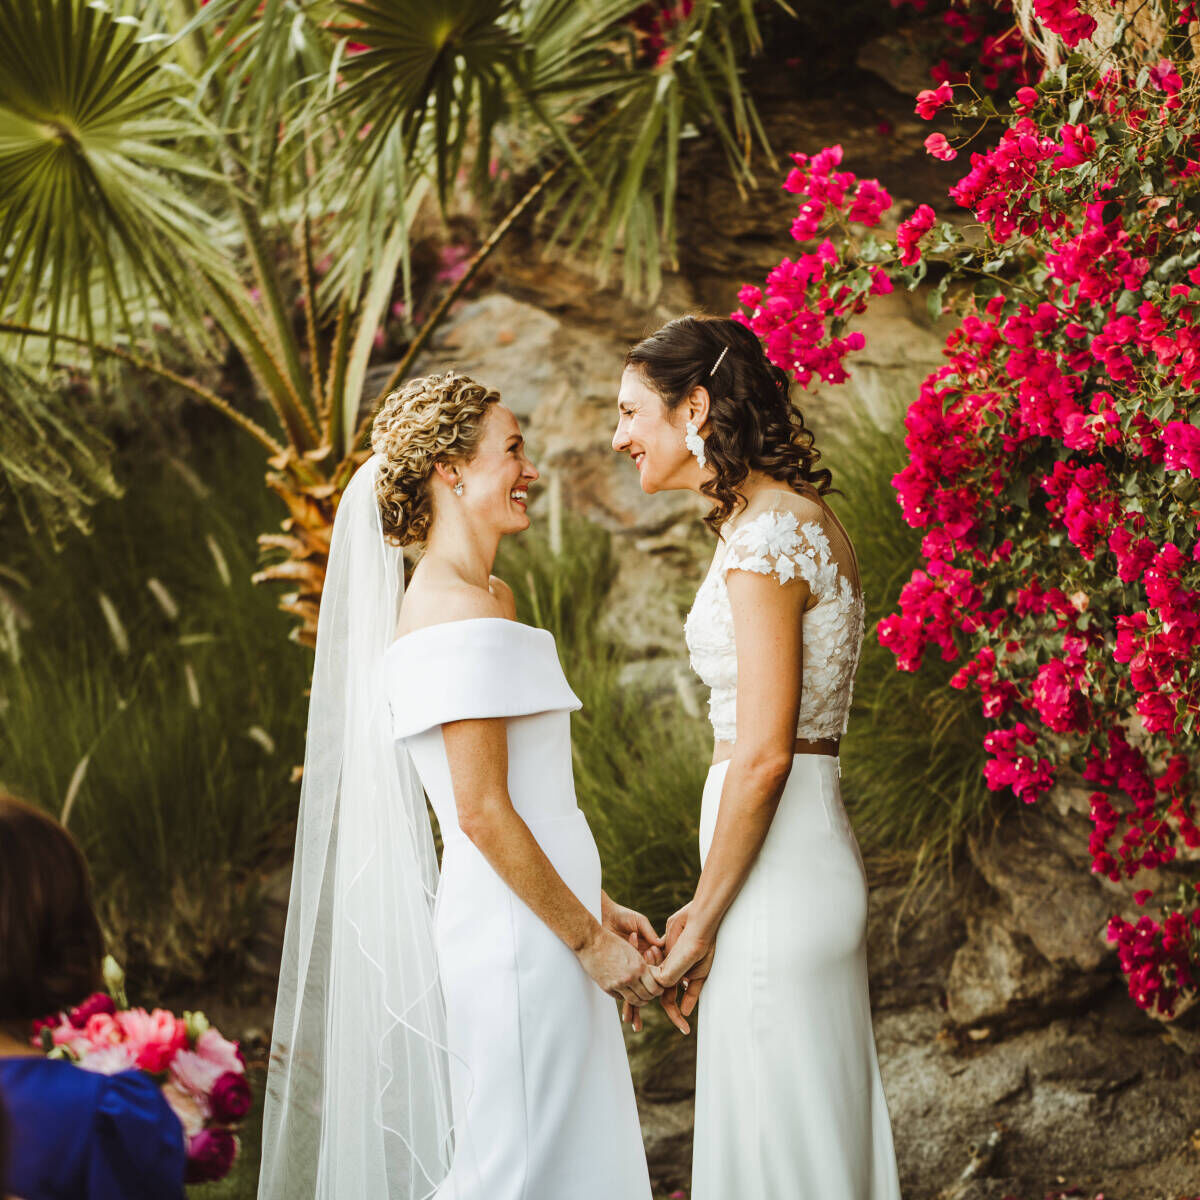 Pink Wedding: Two brides gazing into each other's eyes at their wedding ceremony.